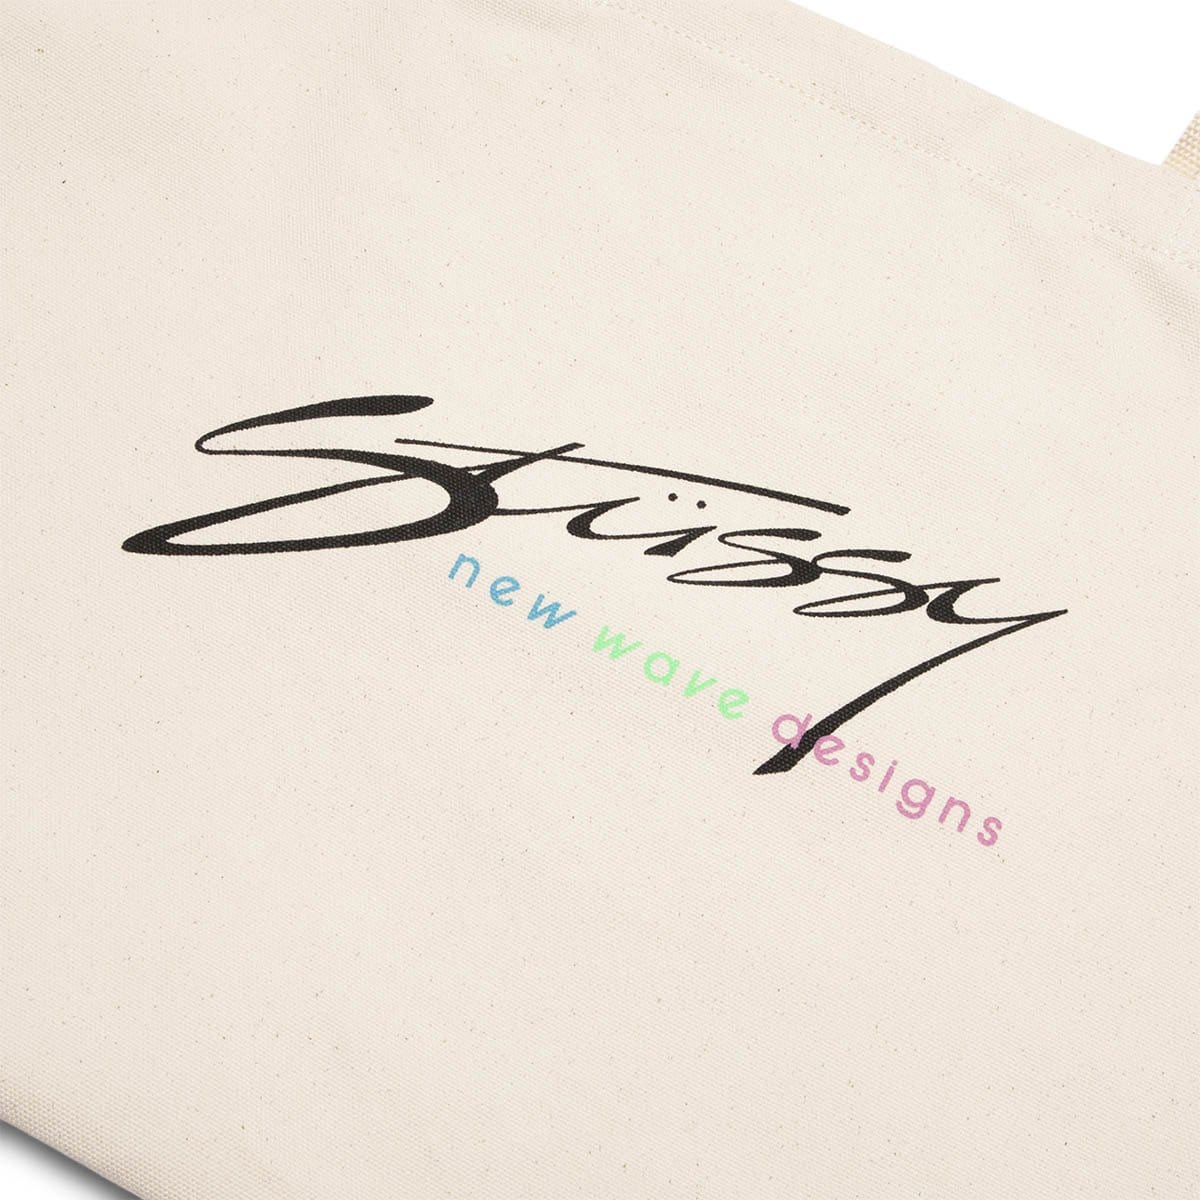 Stüssy Bags & Accessories NATURAL / O/S / 134225 NEW WAVE DESIGNS CANVAS TOTE